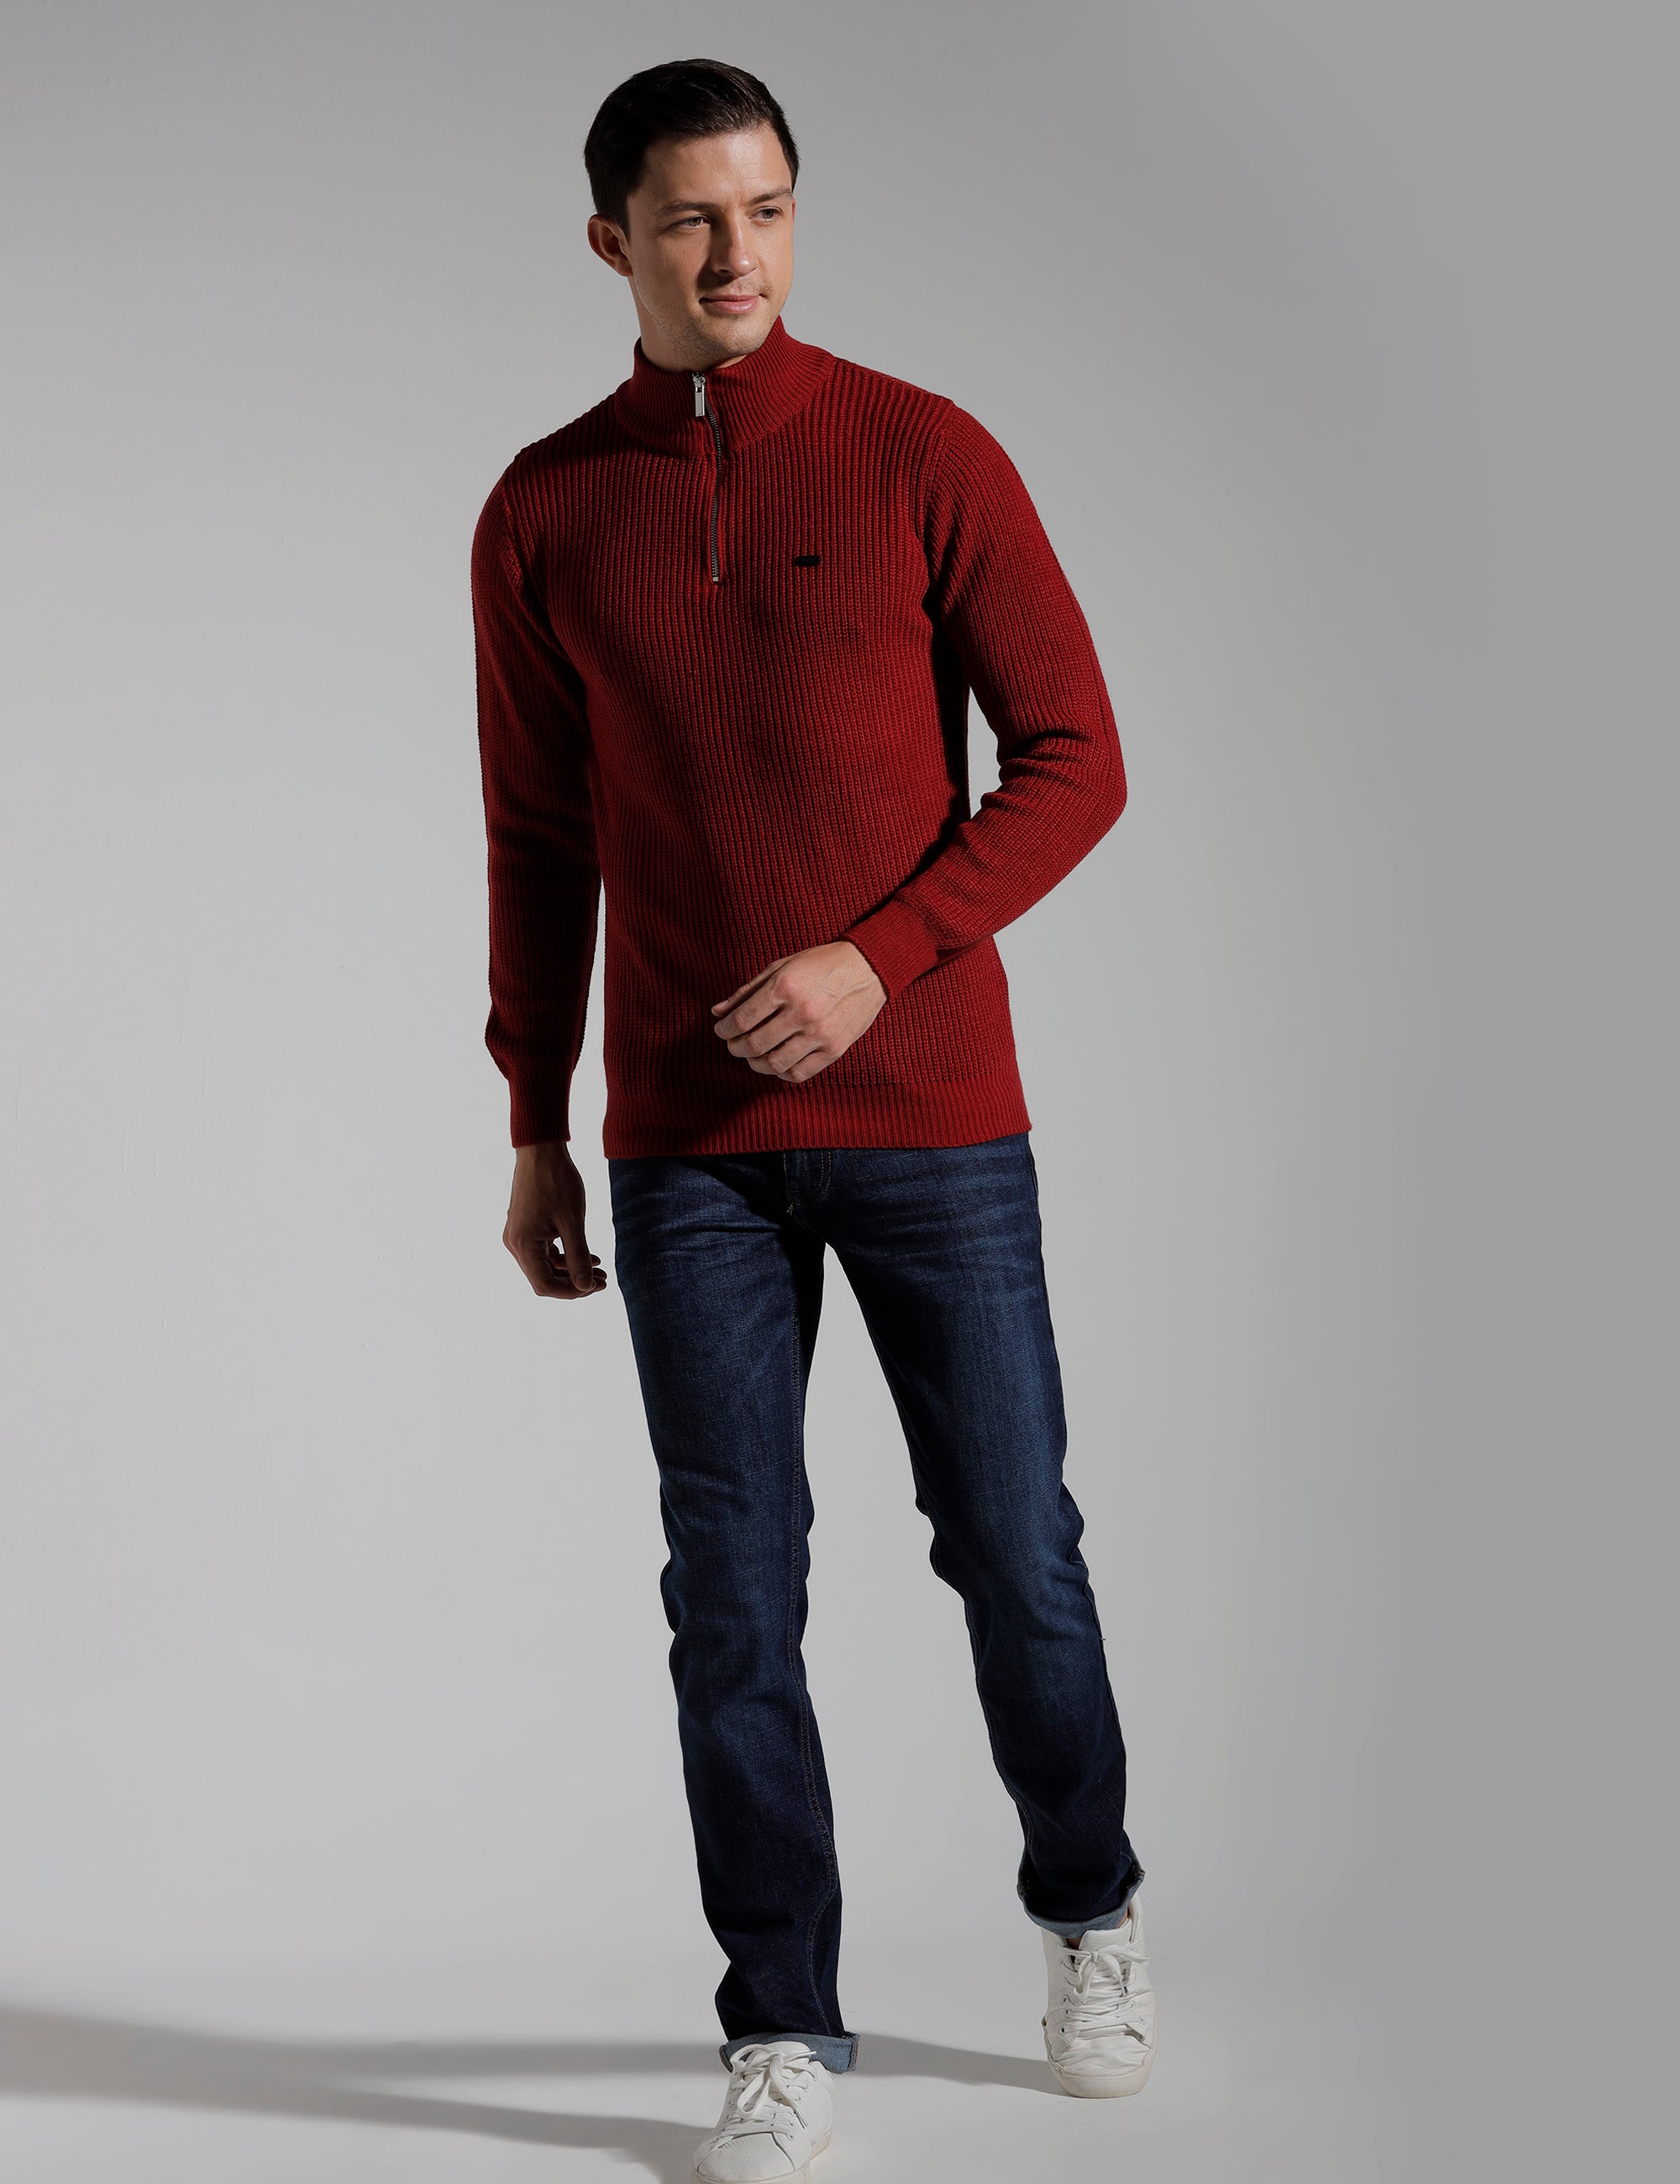 Identiti Full Sleeve Solid Slim Fit Cotton Casual Pull Over T-shirt For Men